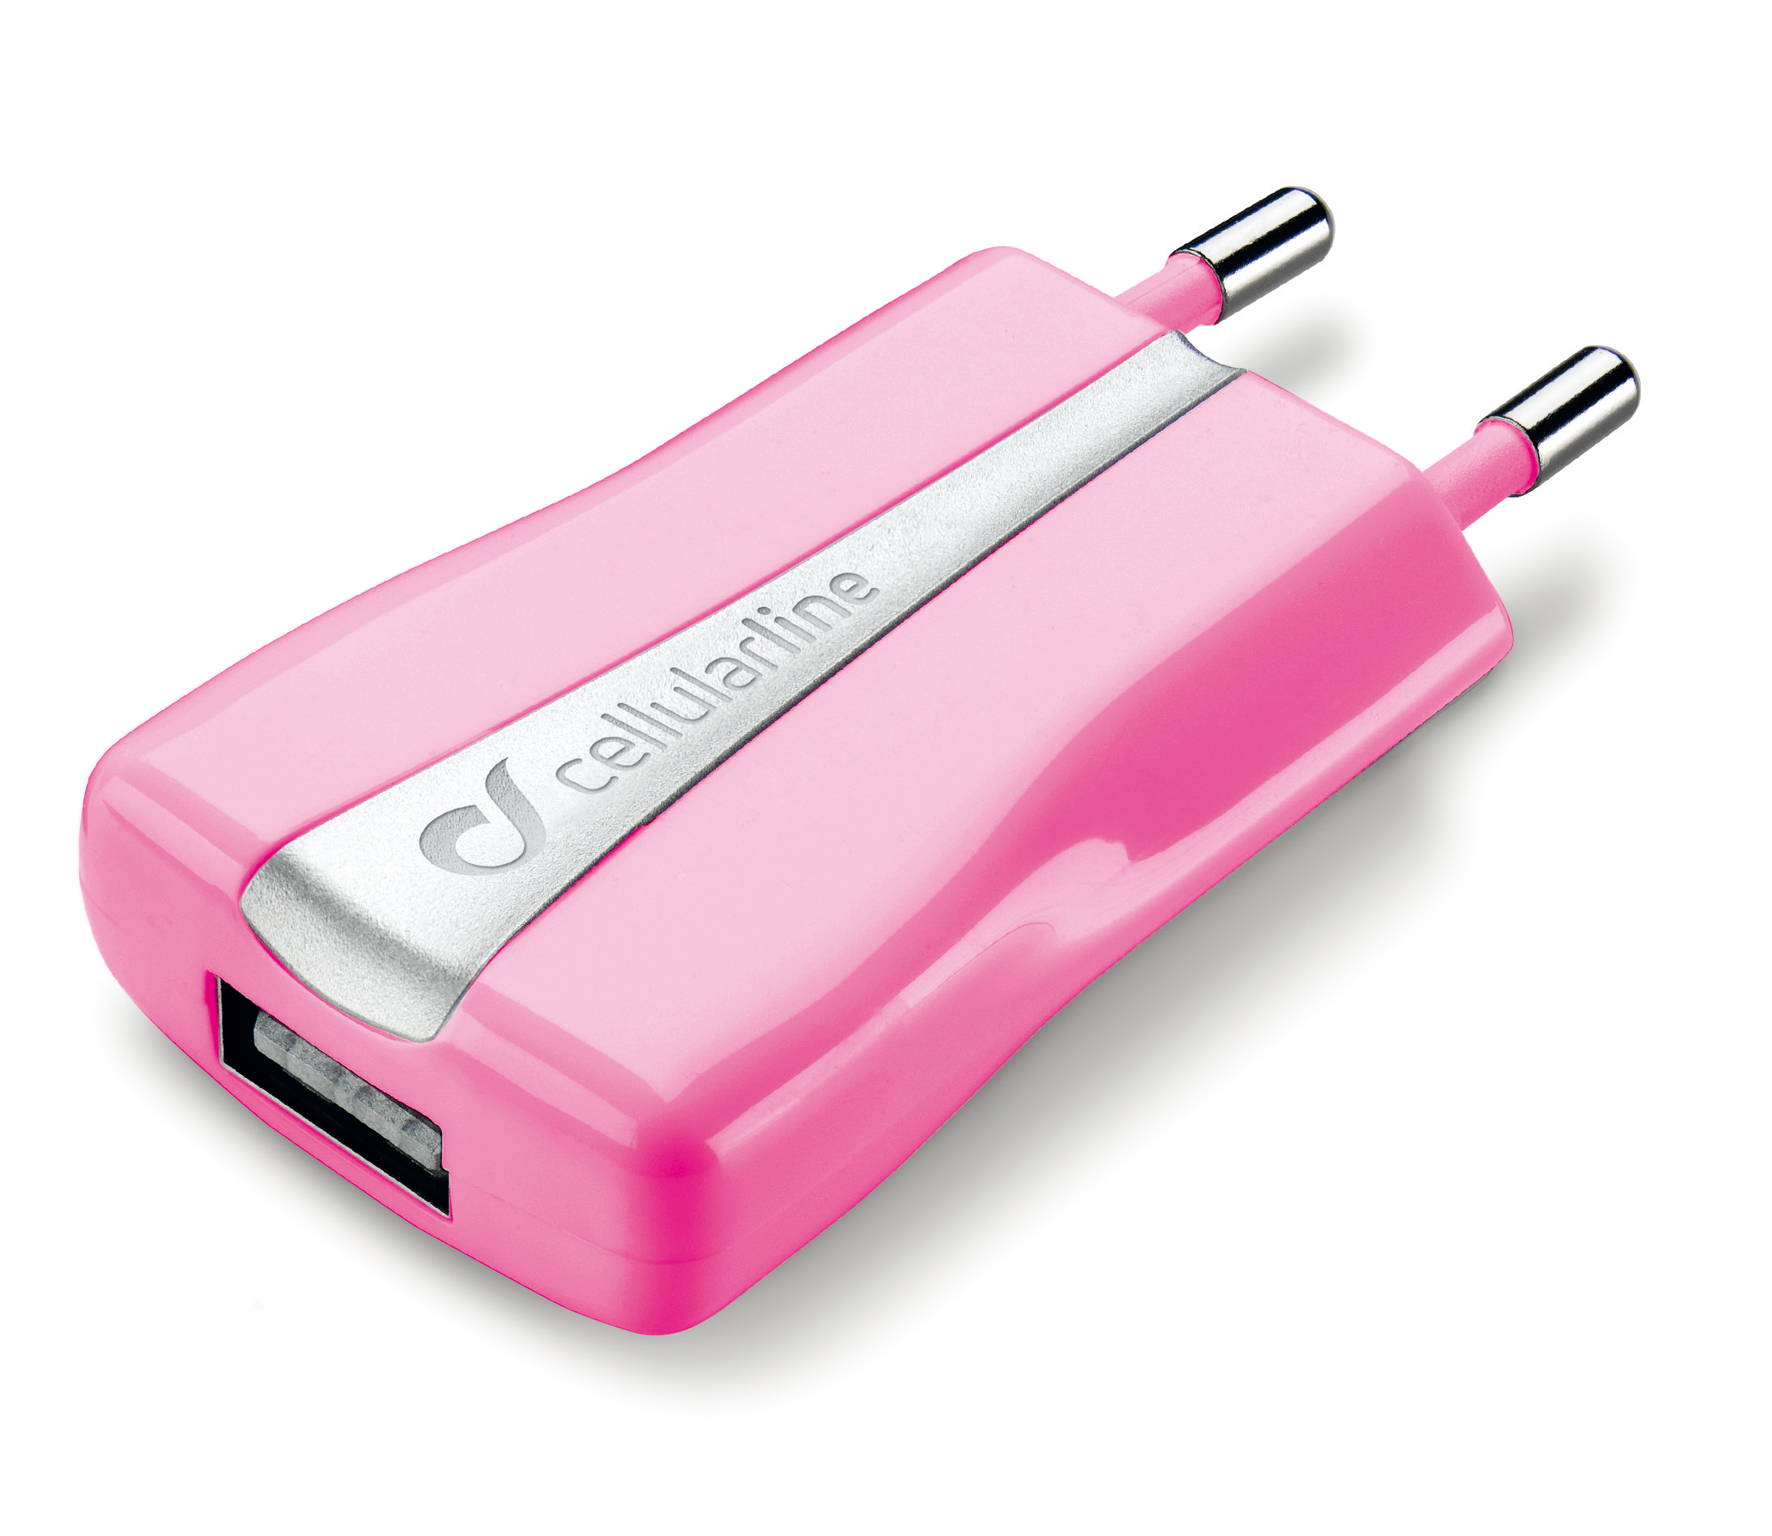 Usb travel micro charger, 1A, pink